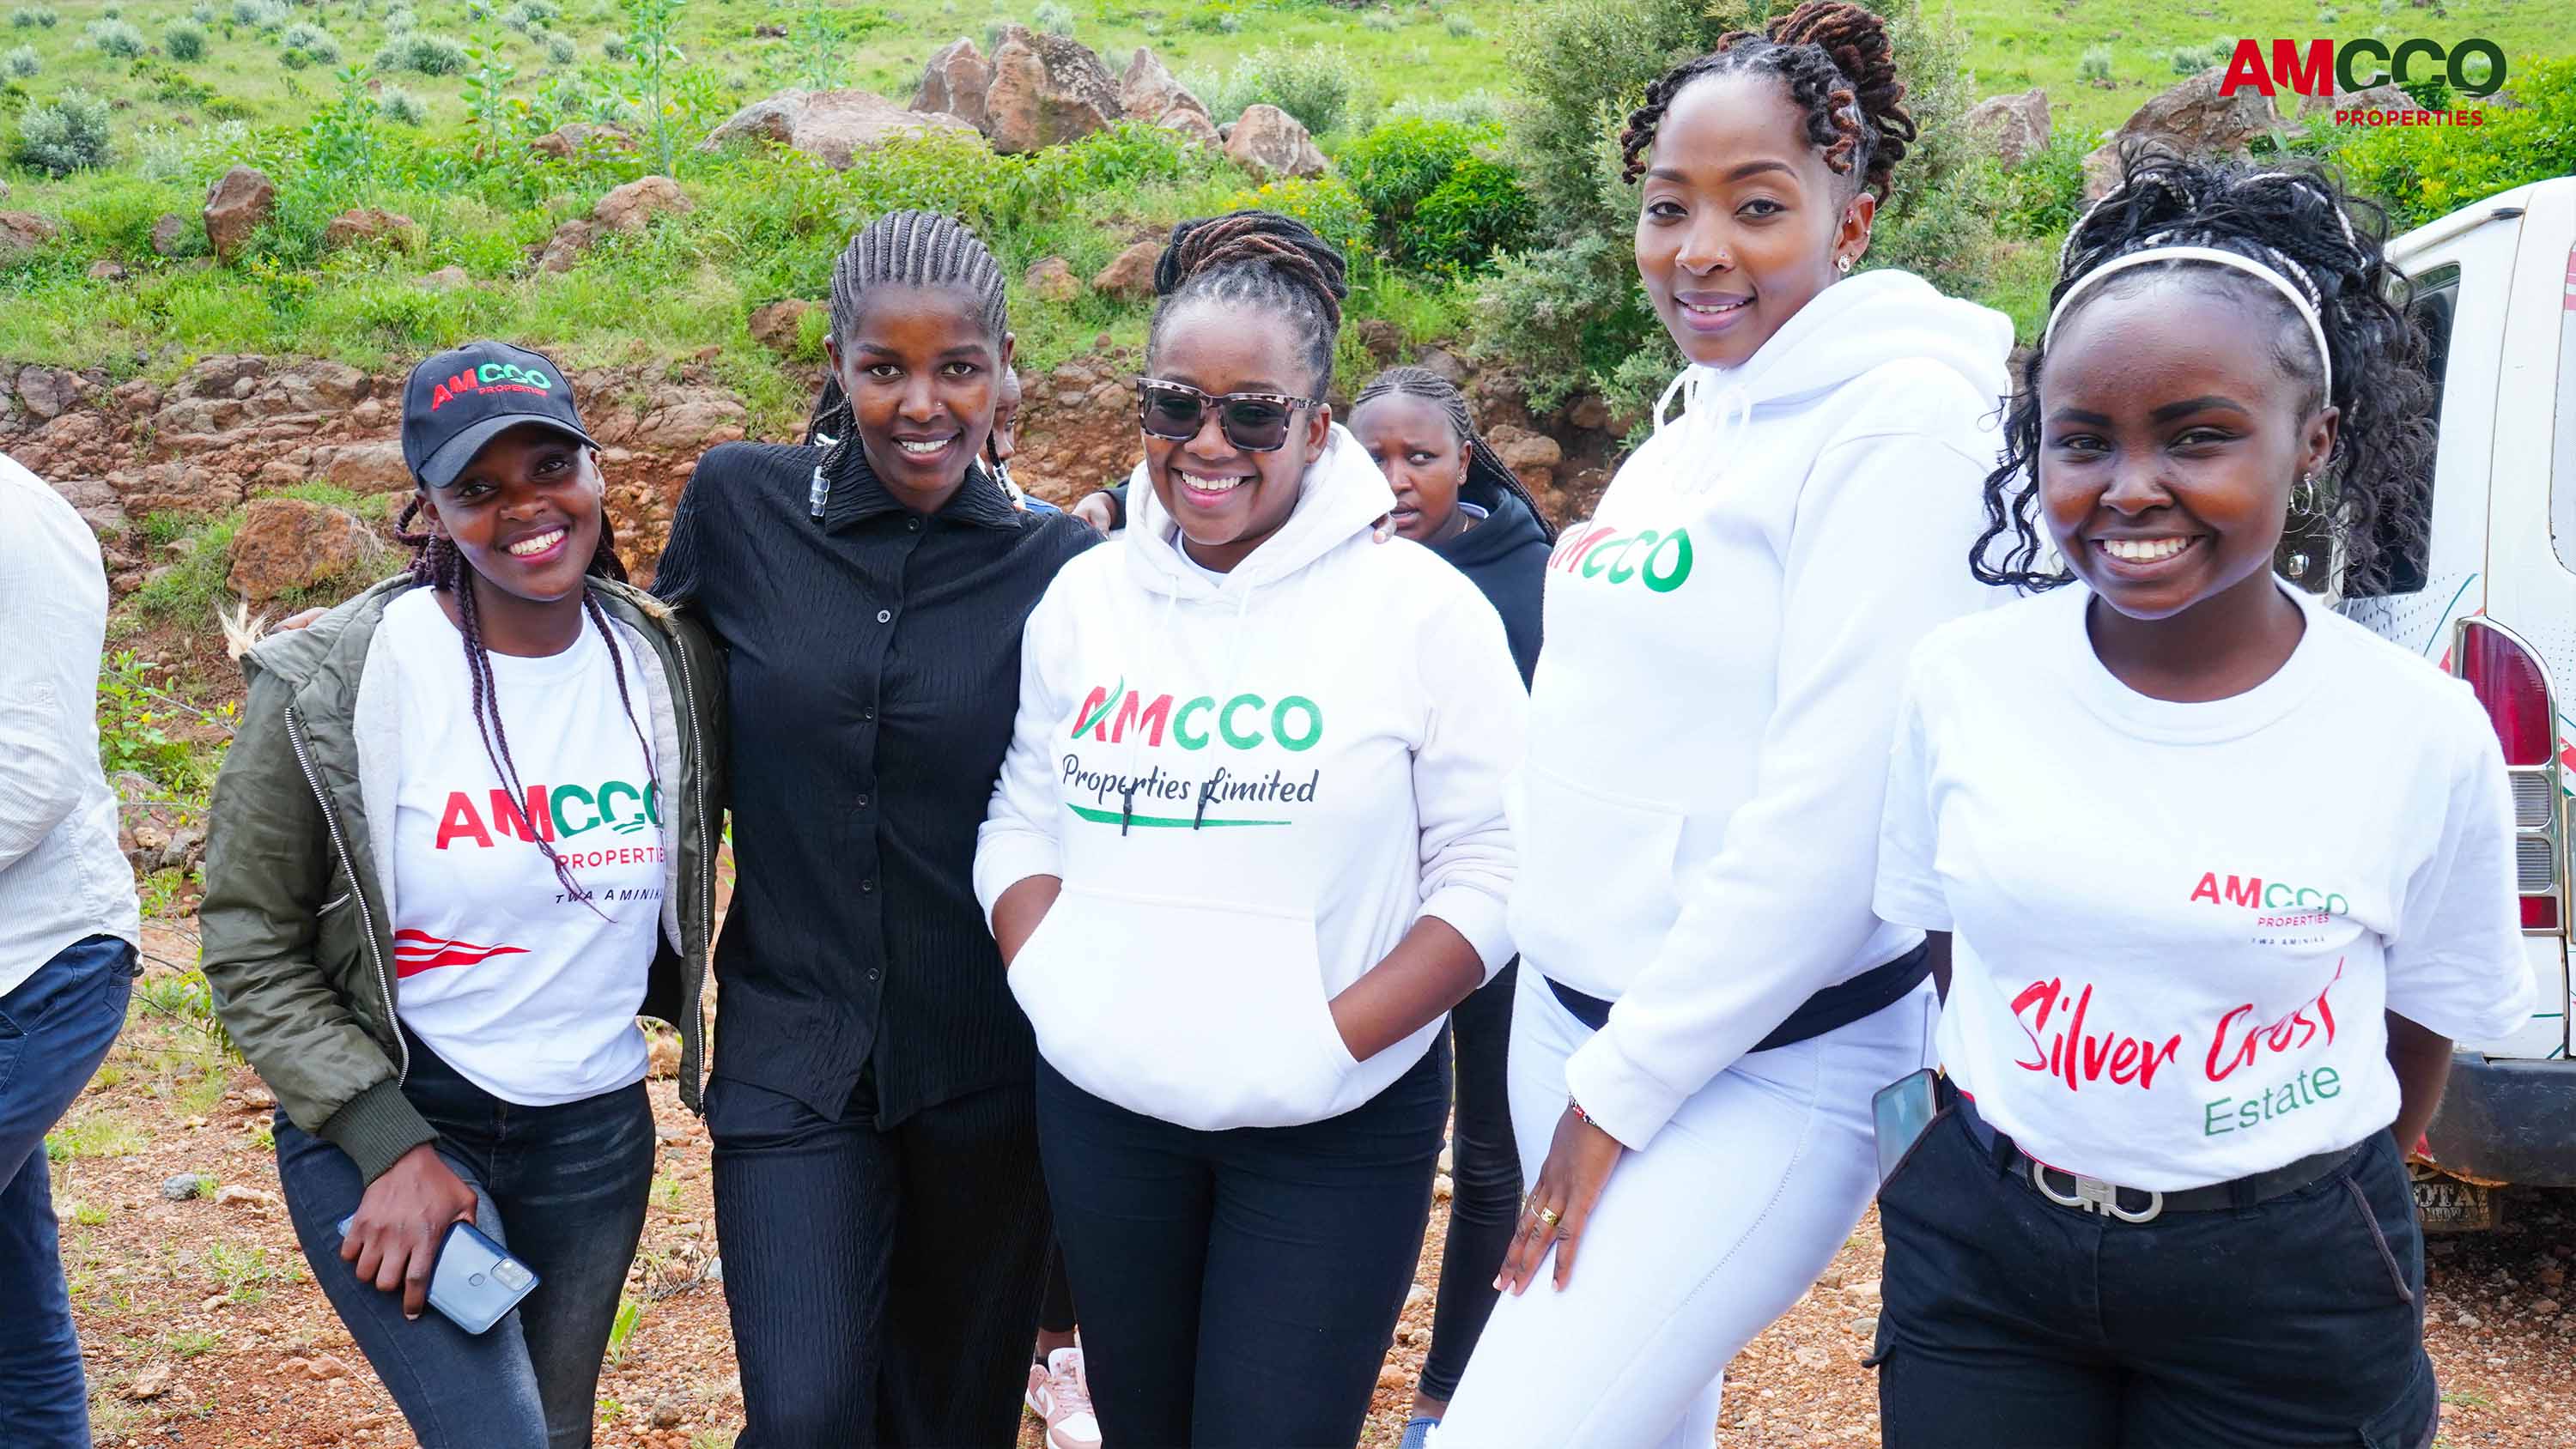 Amcco properties is now in Ngong